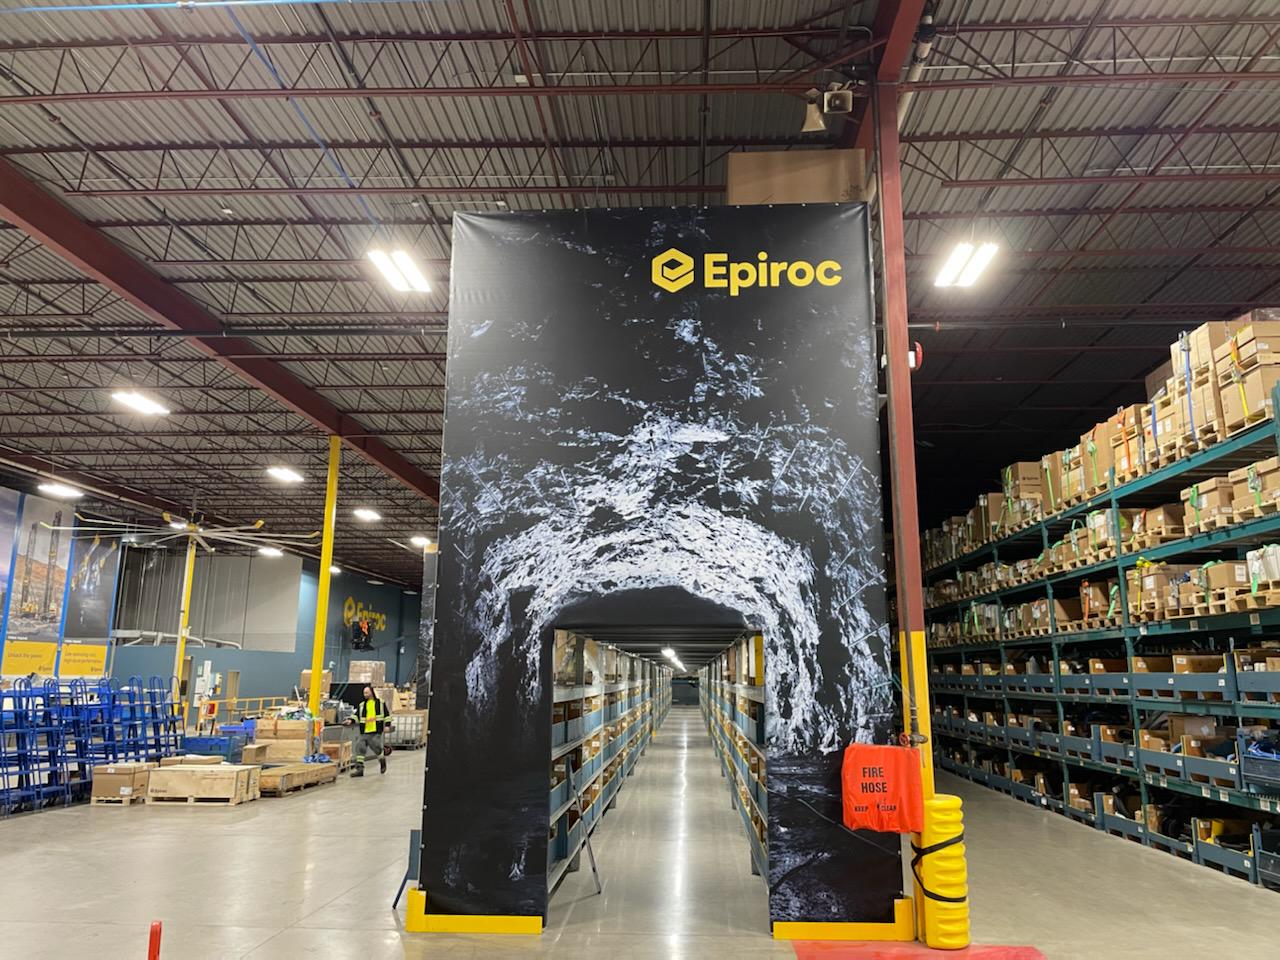 Epiroc Banners on Rack Made by Sign Source Solutions in Concord, ON